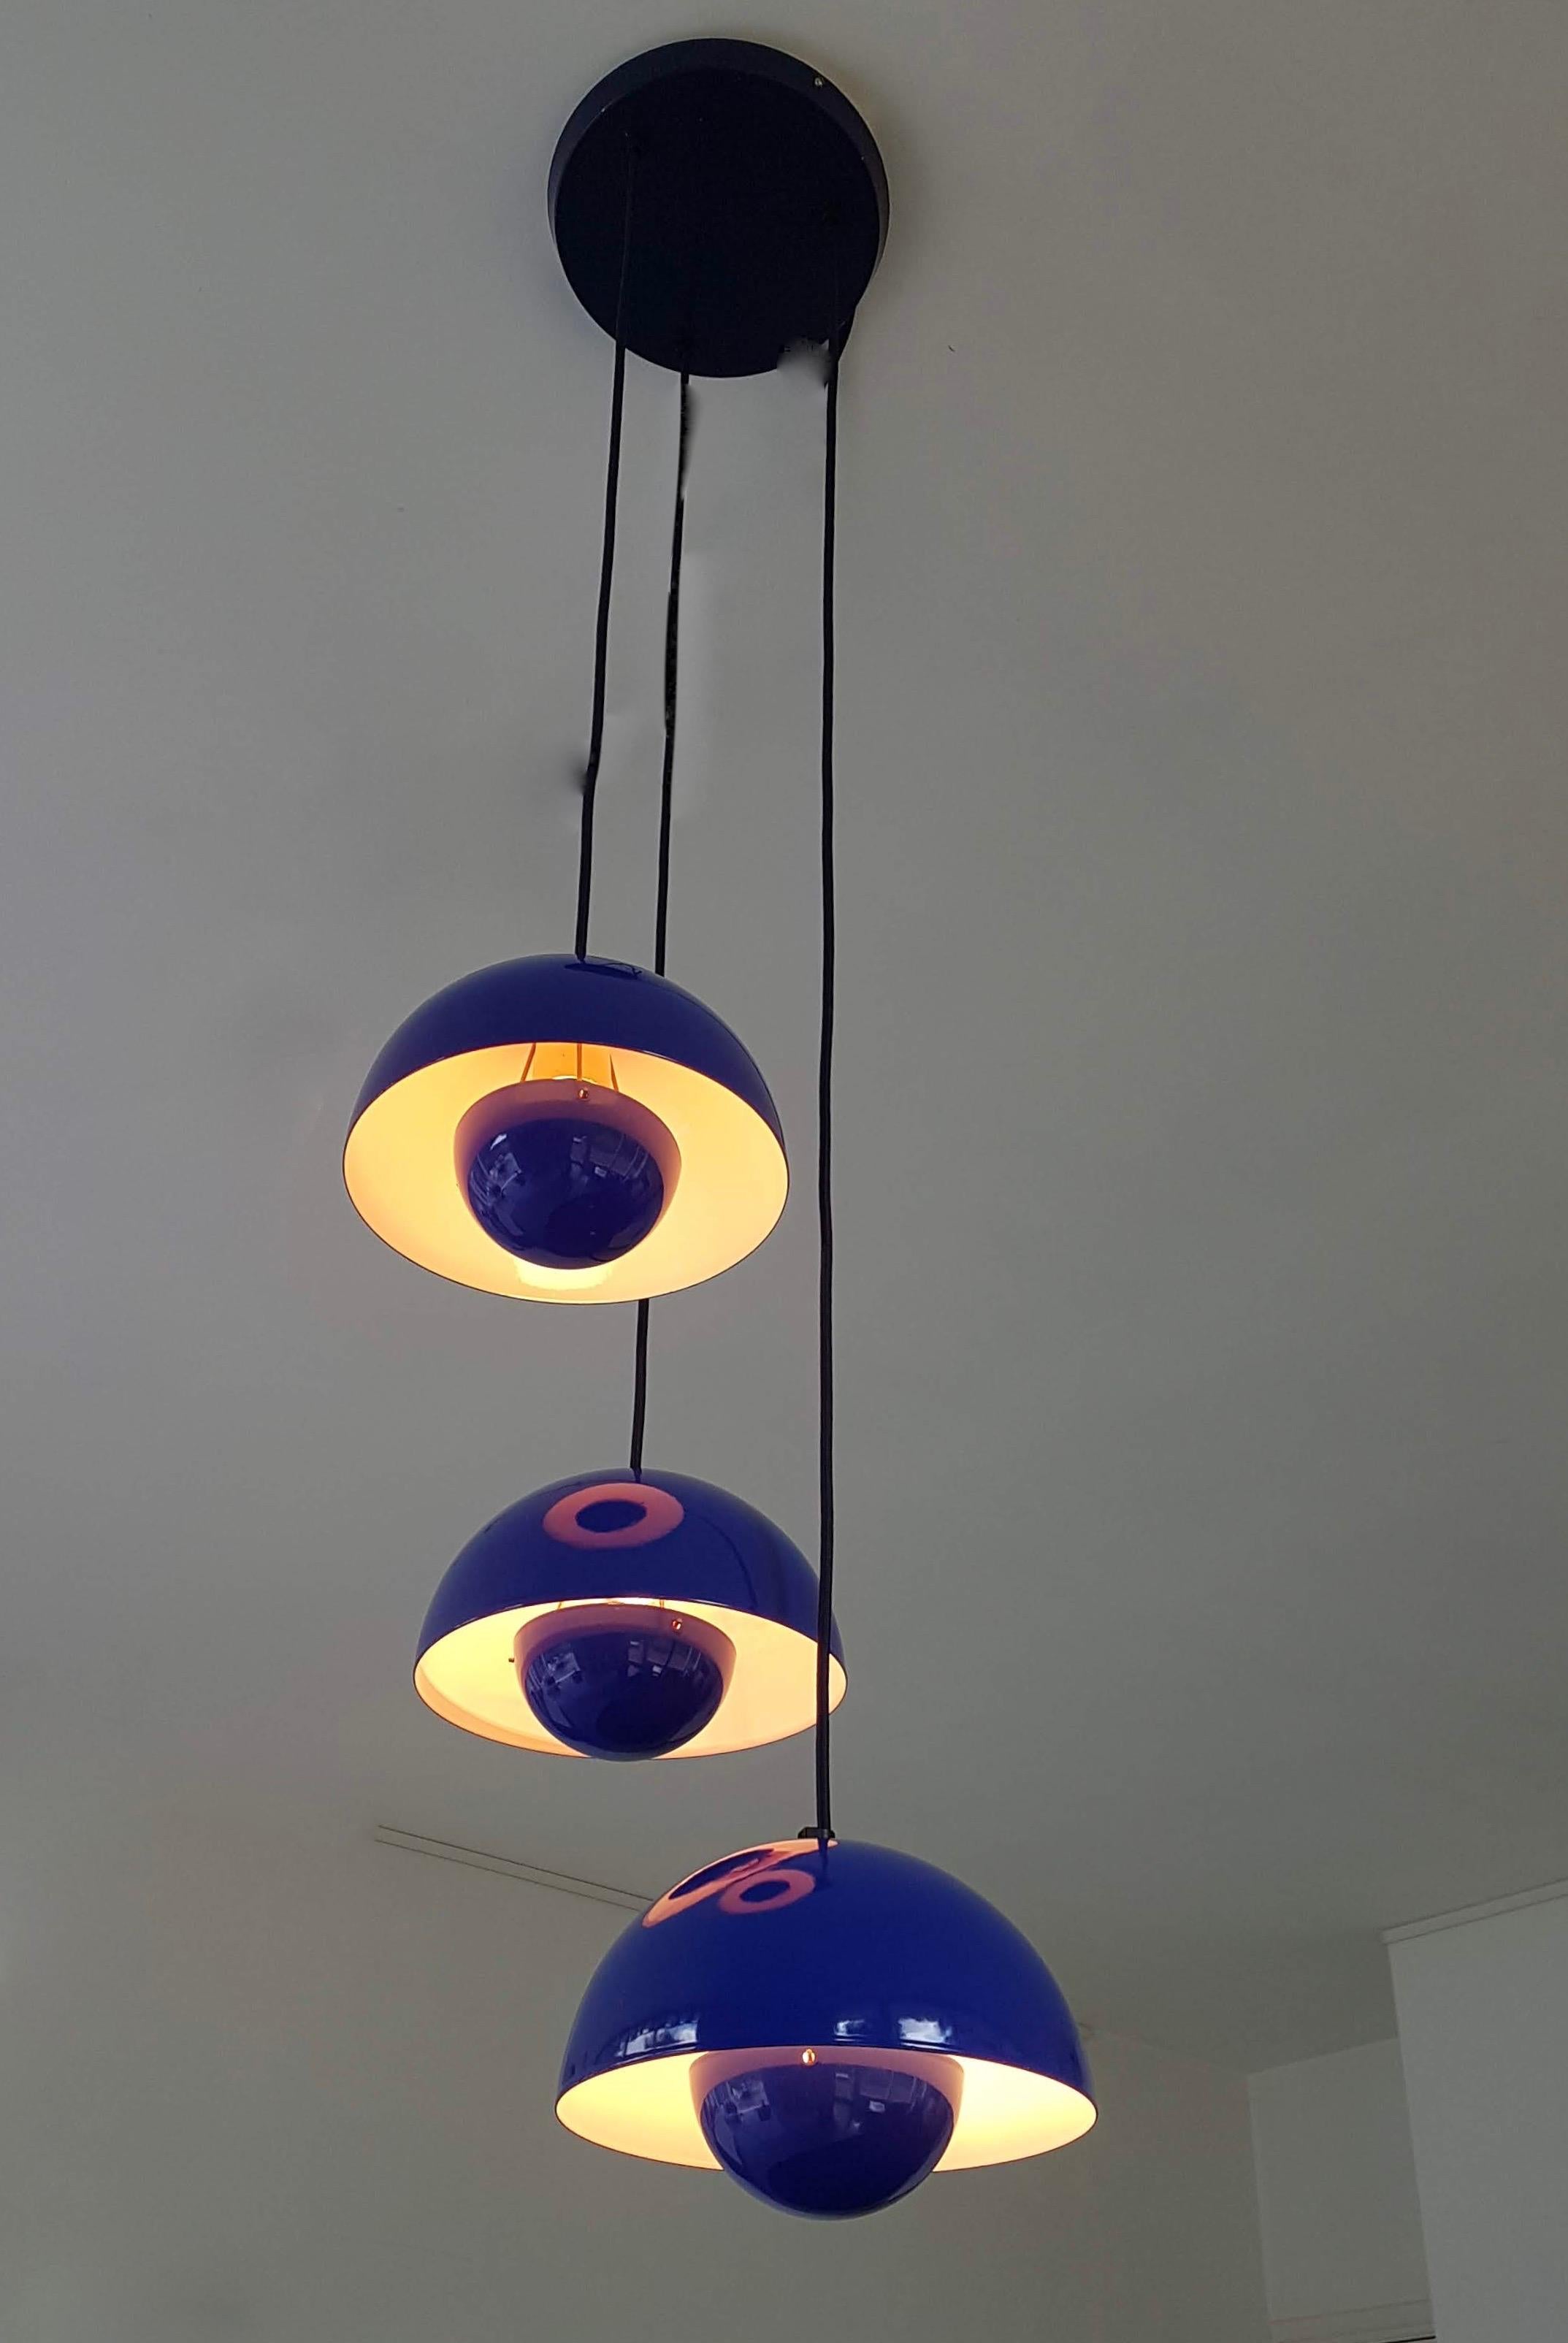 Flower Pot chandelier by Verner Panton consisting of three mounted iconic 'Flower Pot' lamps.
The flower pot, with its two enameled steel semicircular spheres facing each other, is a brilliant colourful design that was originally designed by Verner